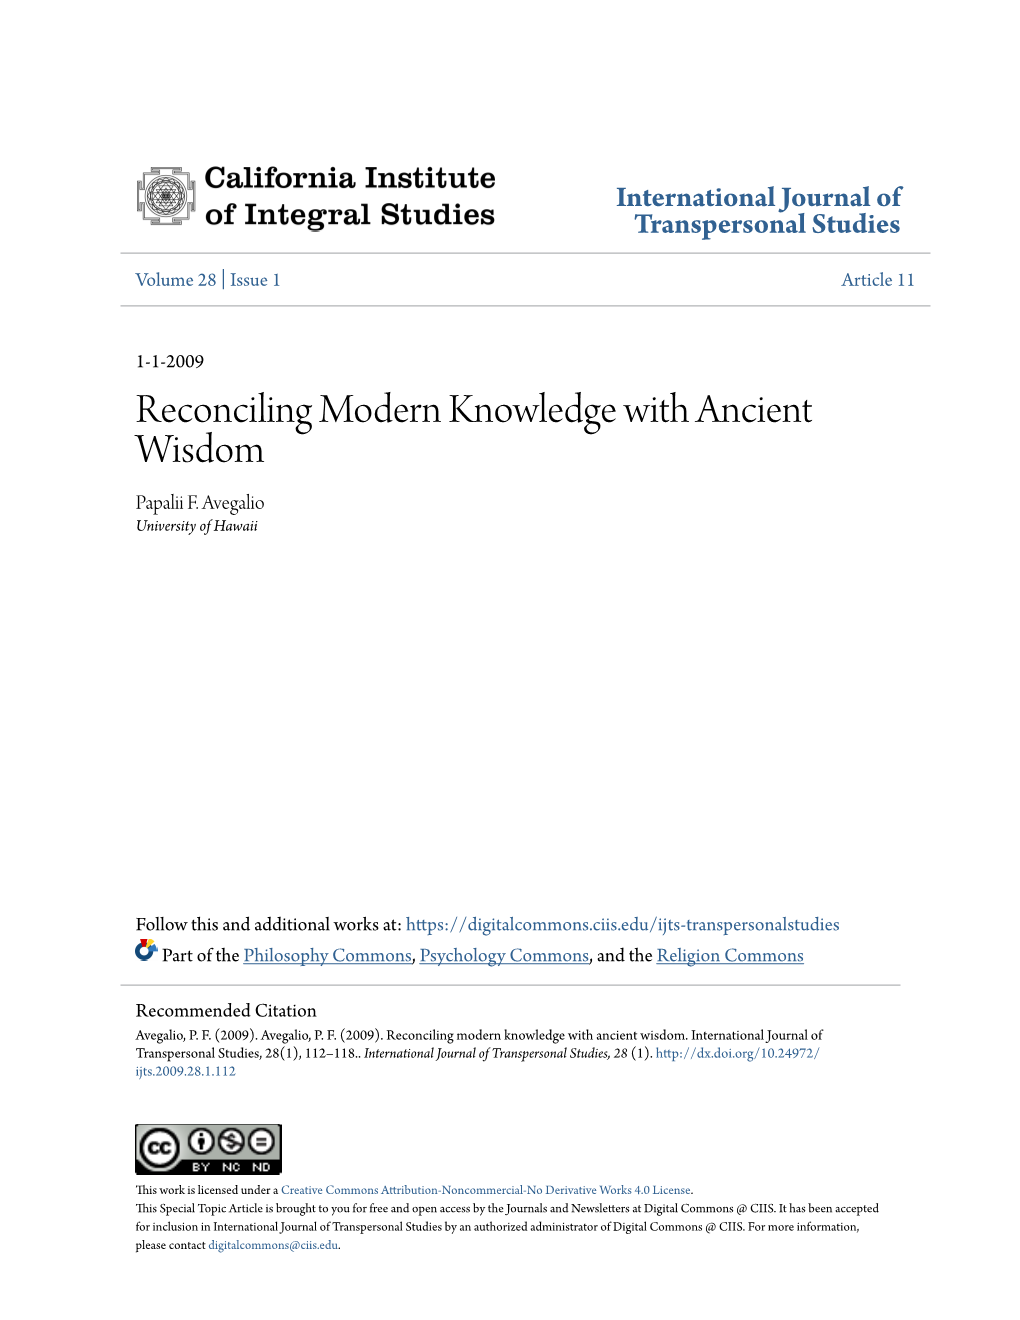 Reconciling Modern Knowledge with Ancient Wisdom Papalii F